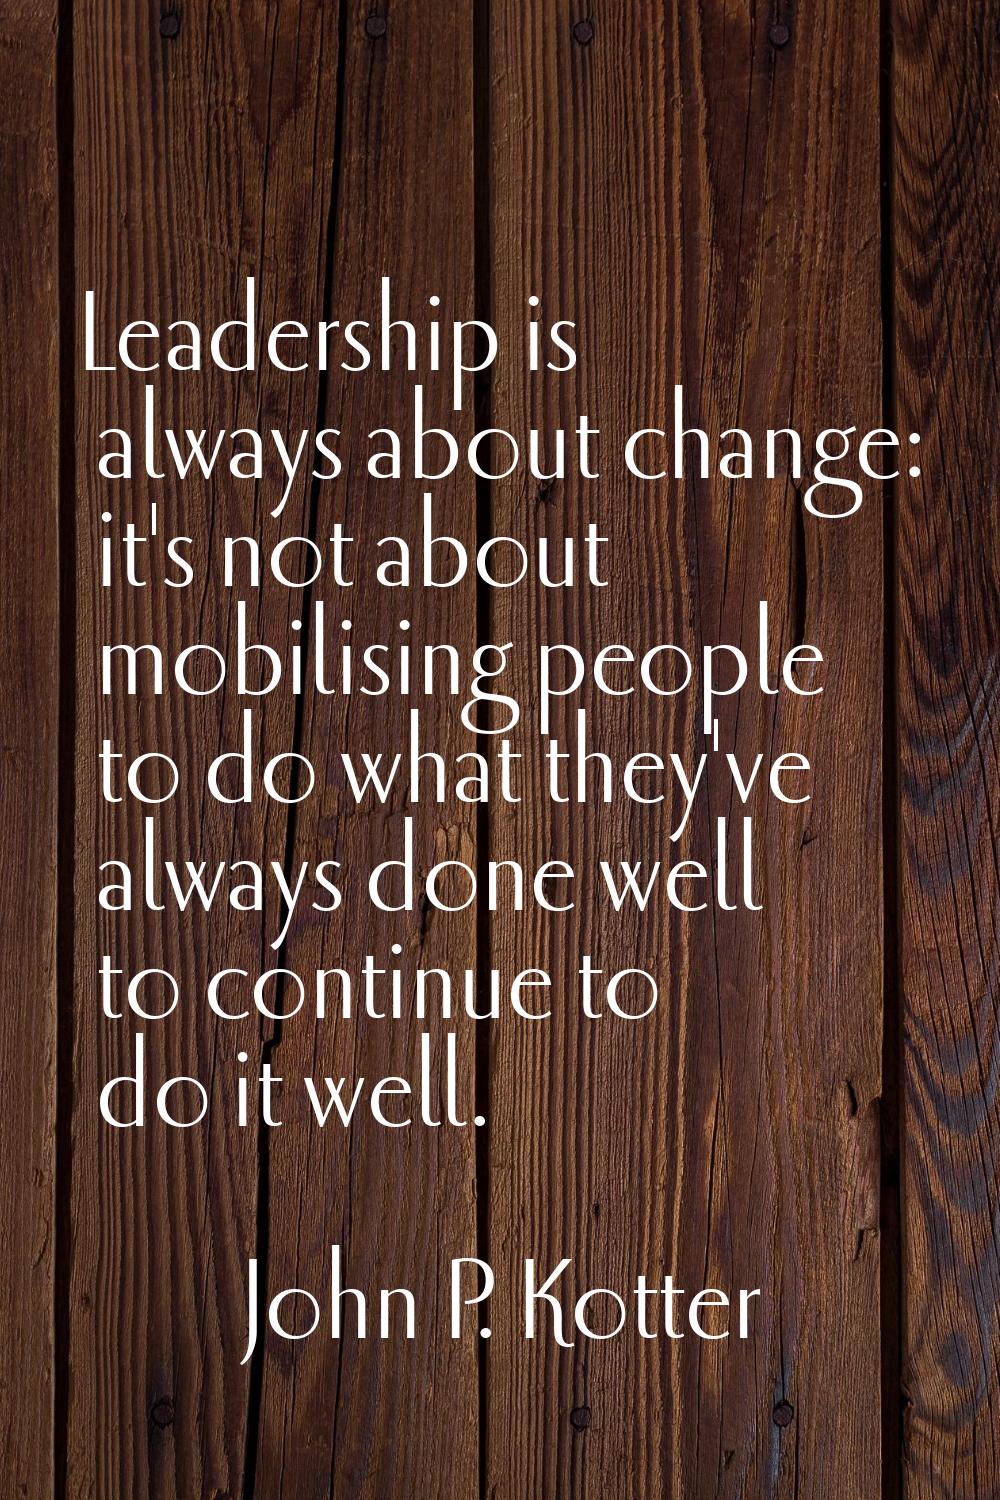 Leadership is always about change: it's not about mobilising people to do what they've always done 